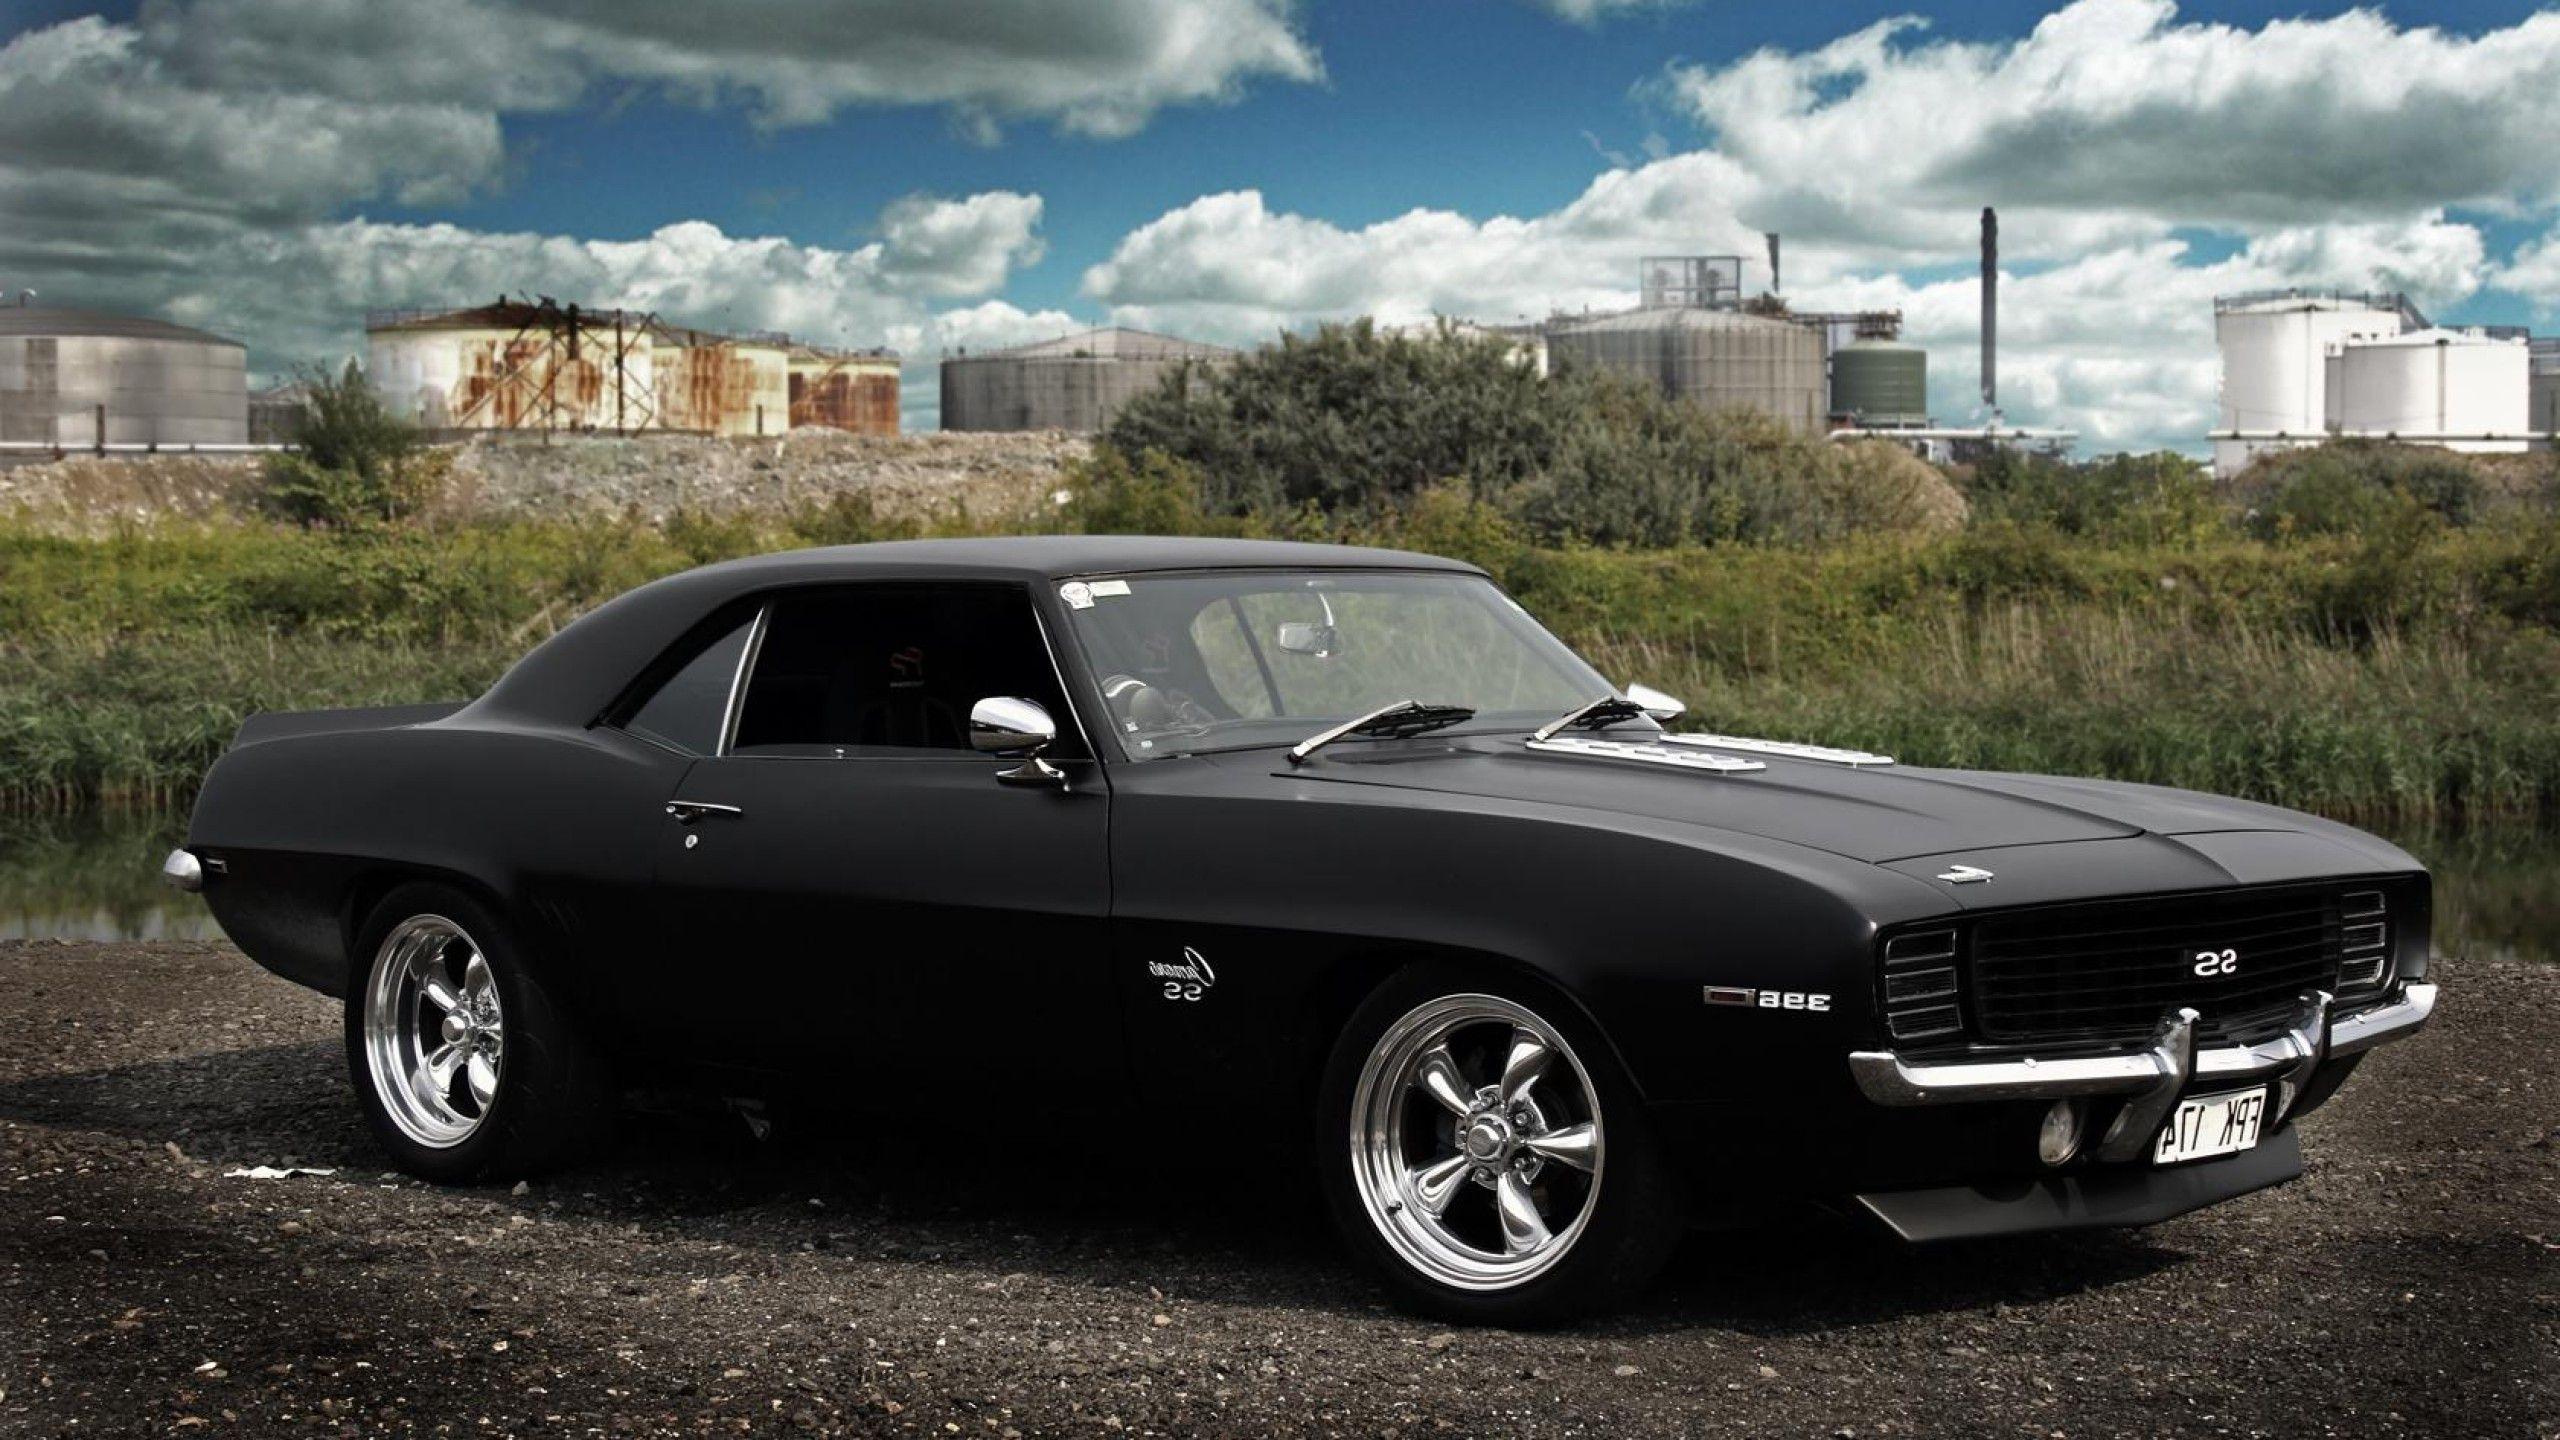 Modern Muscle Car Wallpapers - Top Free Modern Muscle Car Backgrounds